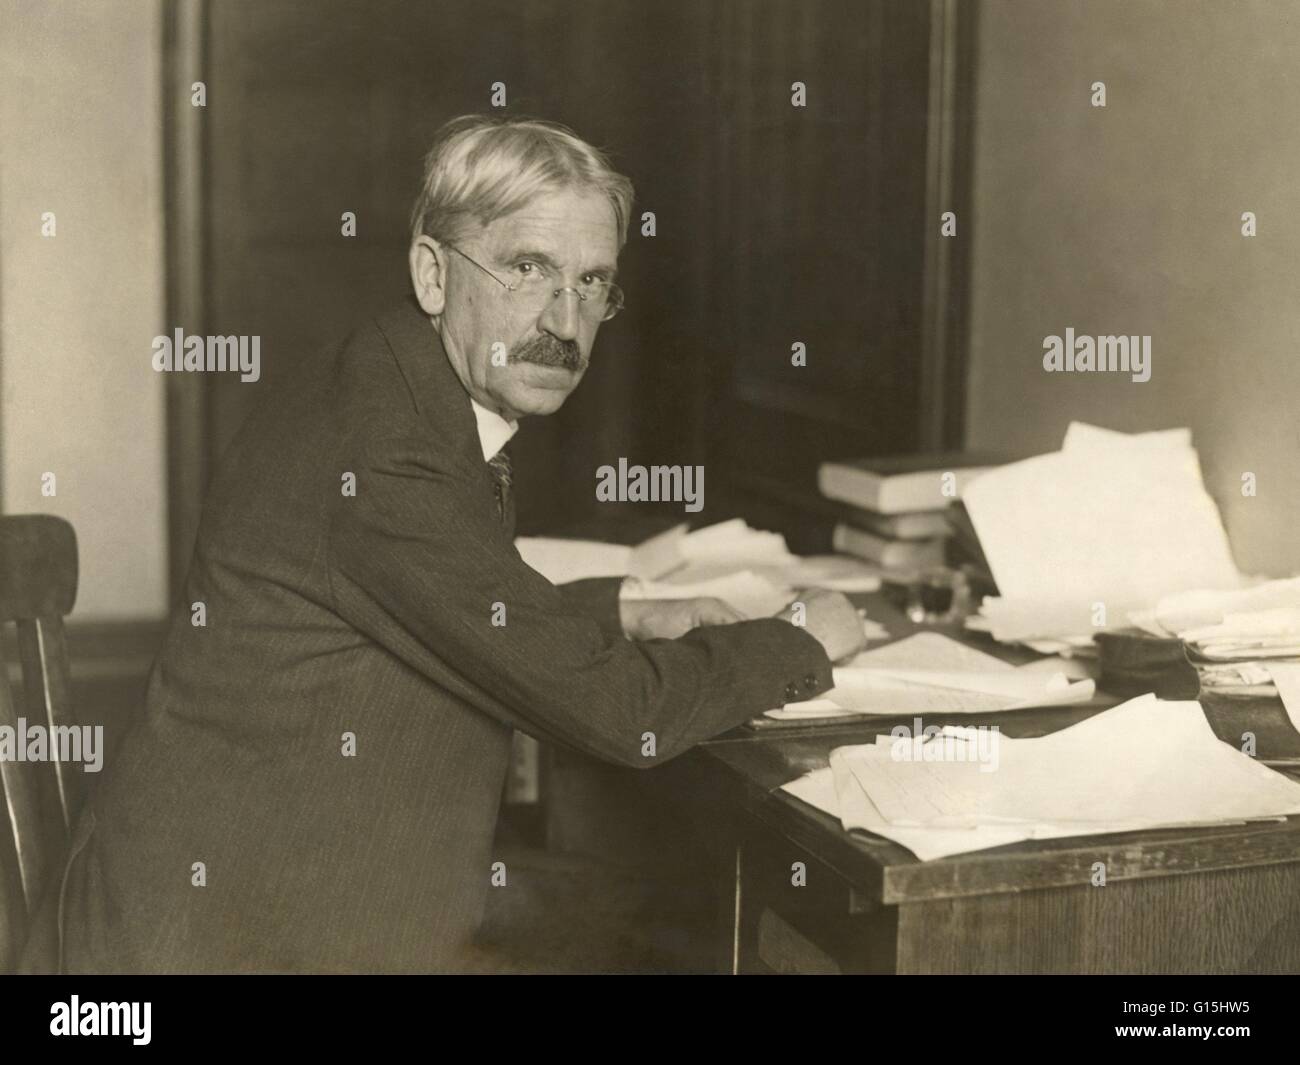 John Dewey (1859-1952), American philosopher and psychologist. Dewey, along with Charles Sanders Peirce and William James, is recognized as one of the founders of the philosophy of pragmatism and of functional psychology. He is well known for his publicat Stock Photo